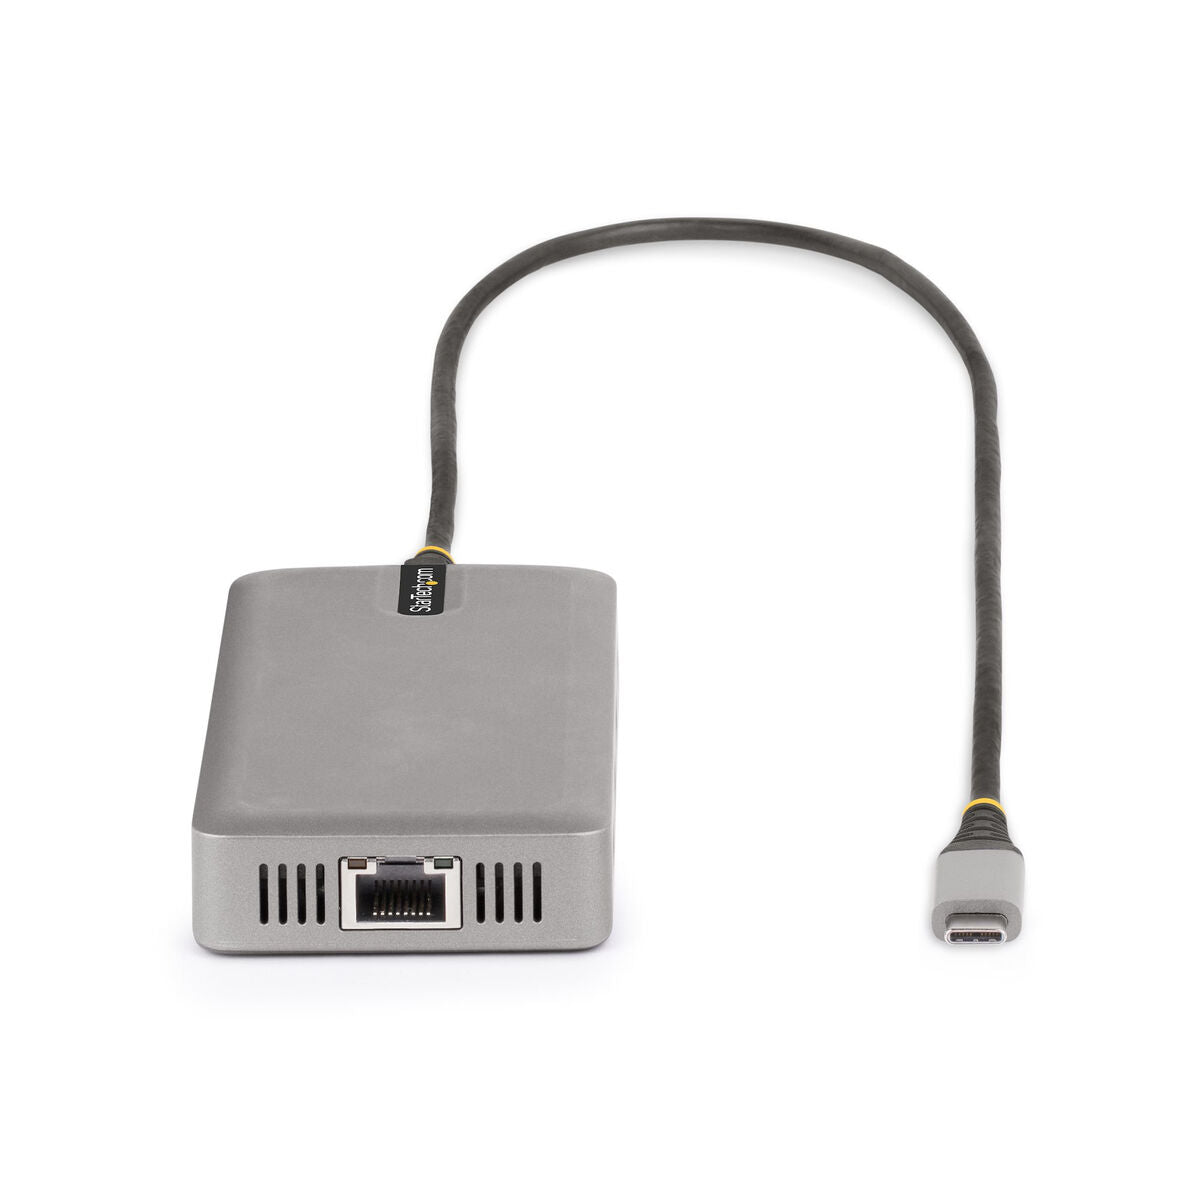 USB-C Hub Startech 117B-USBC-MULTIPORT Grey 100 W, Startech, Computing, Accessories, usb-c-hub-startech-117b-usbc-multiport-grey-100-w, Brand_Startech, category-reference-2609, category-reference-2803, category-reference-2829, category-reference-t-19685, category-reference-t-19908, category-reference-t-21352, Condition_NEW, networks/wiring, Price_100 - 200, Teleworking, RiotNook